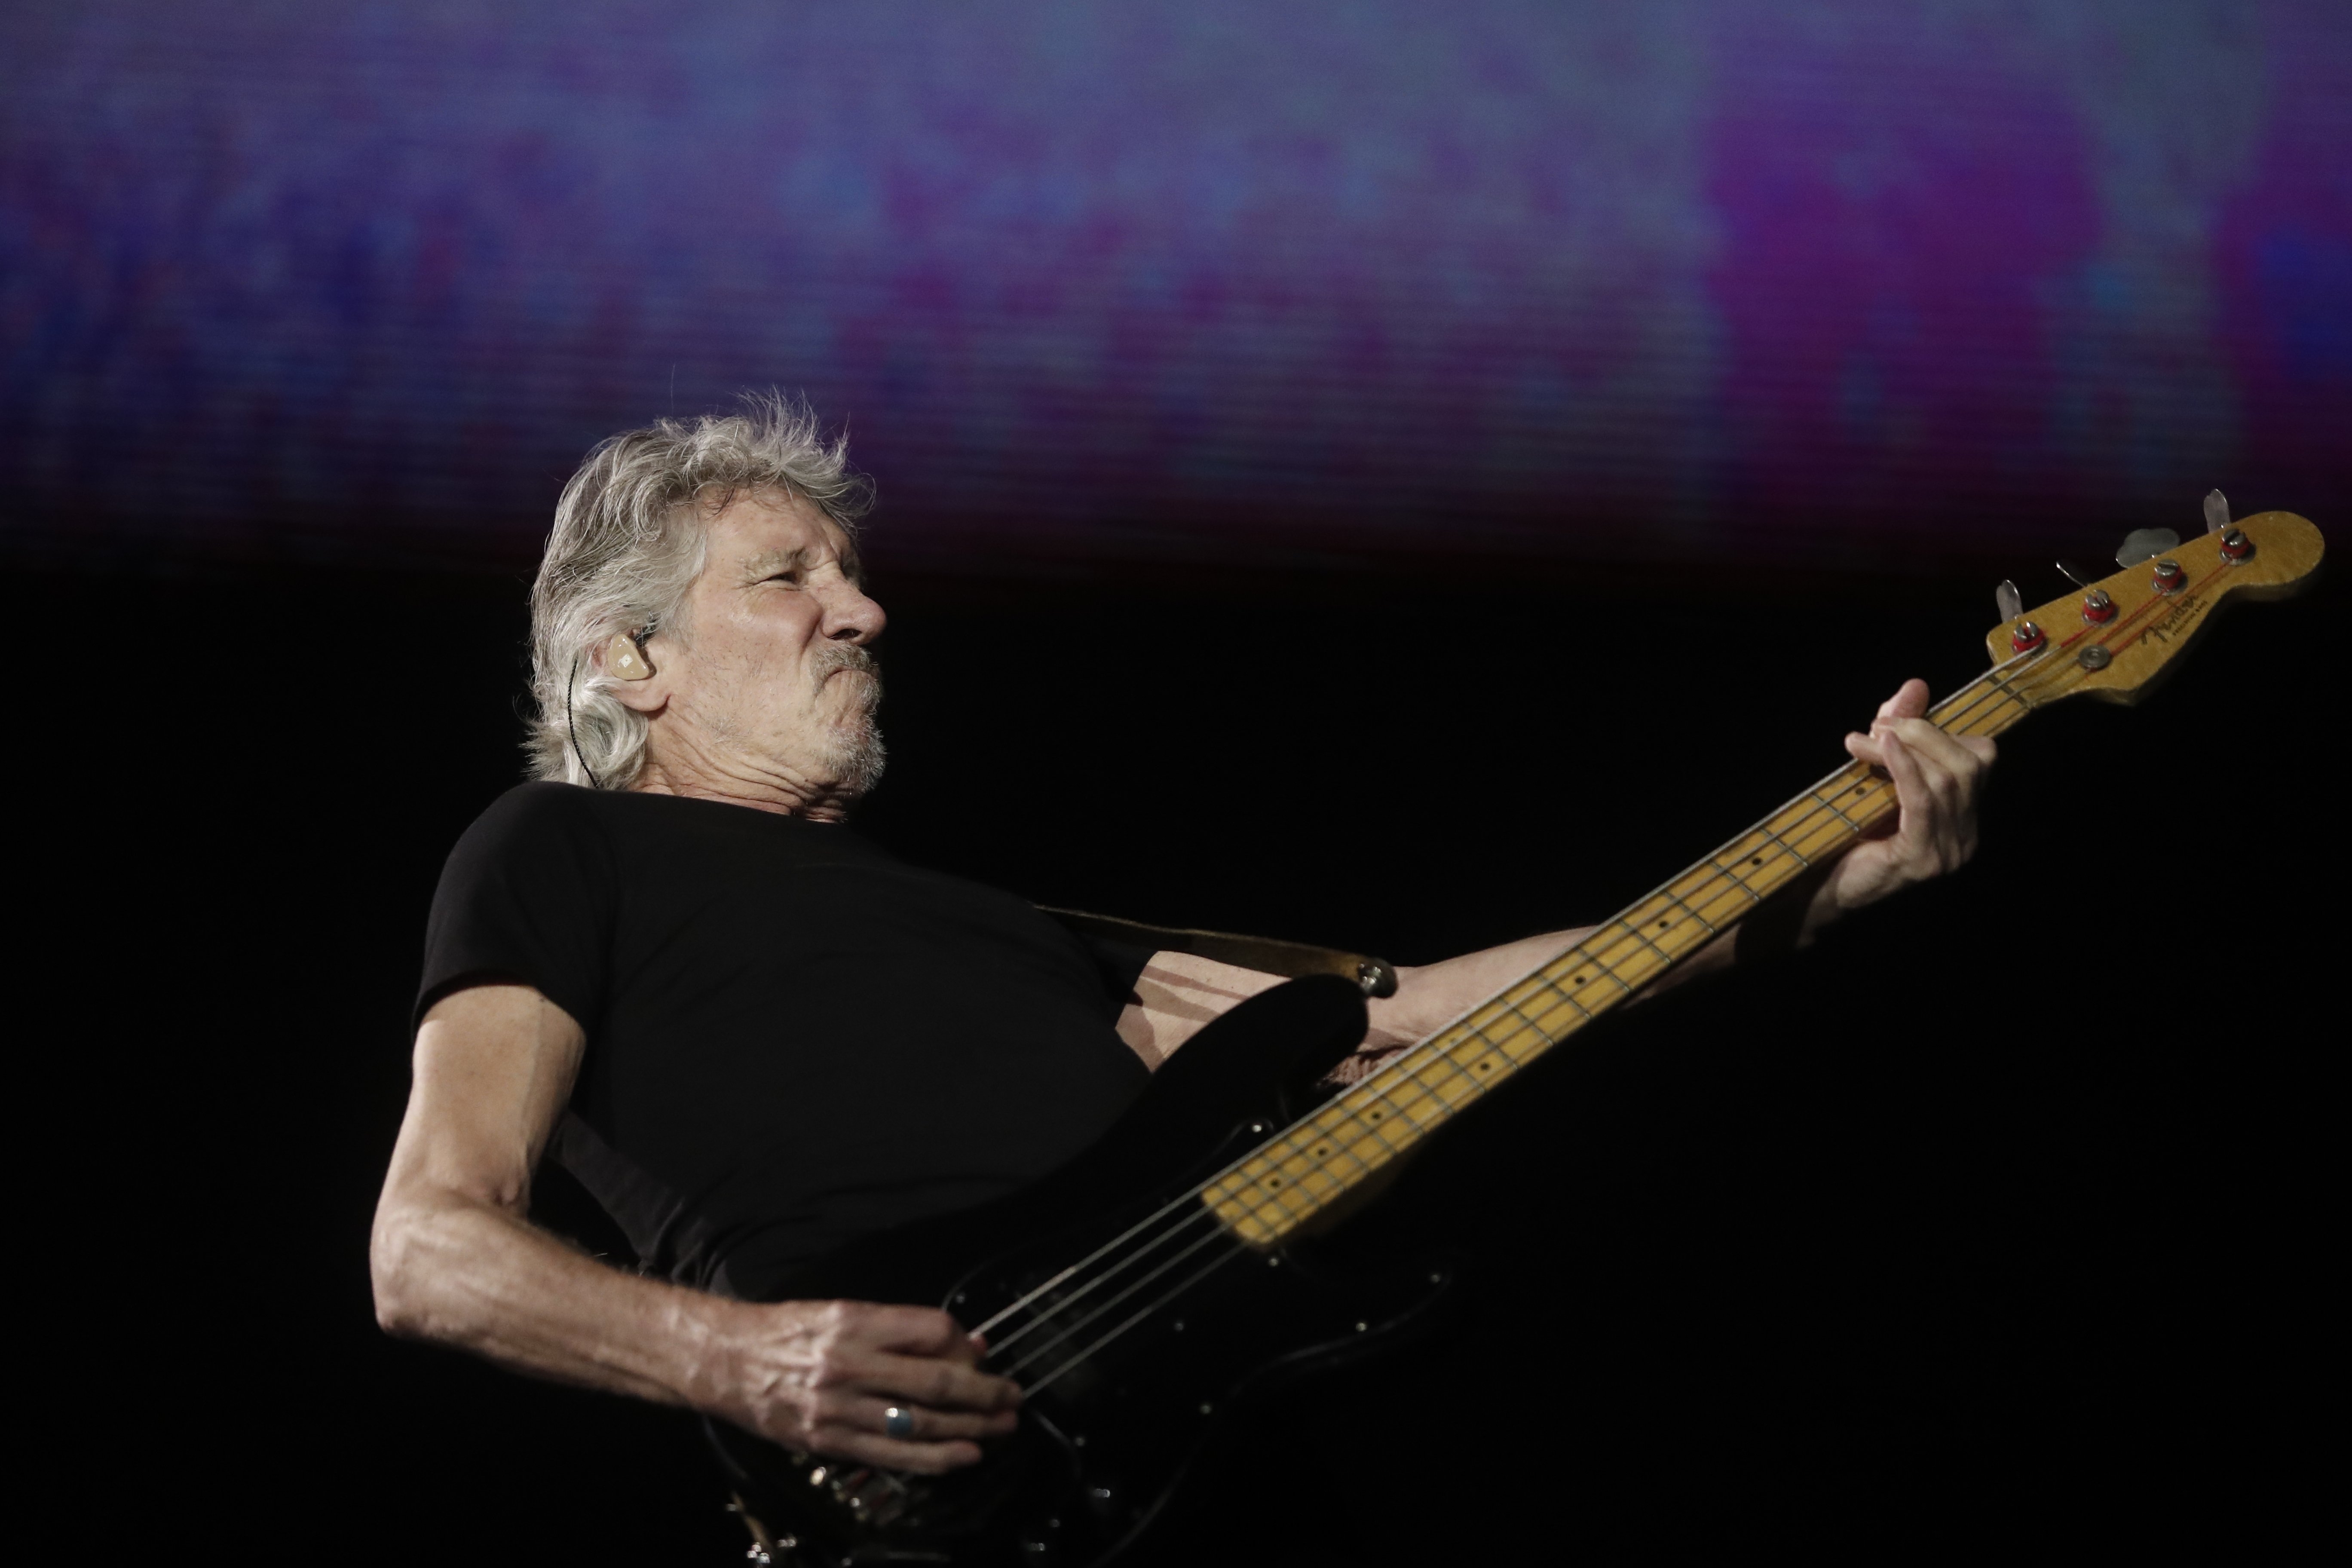 THE POWERS THAT BE CIFRA INTERATIVA por Roger Waters @ Ultimate